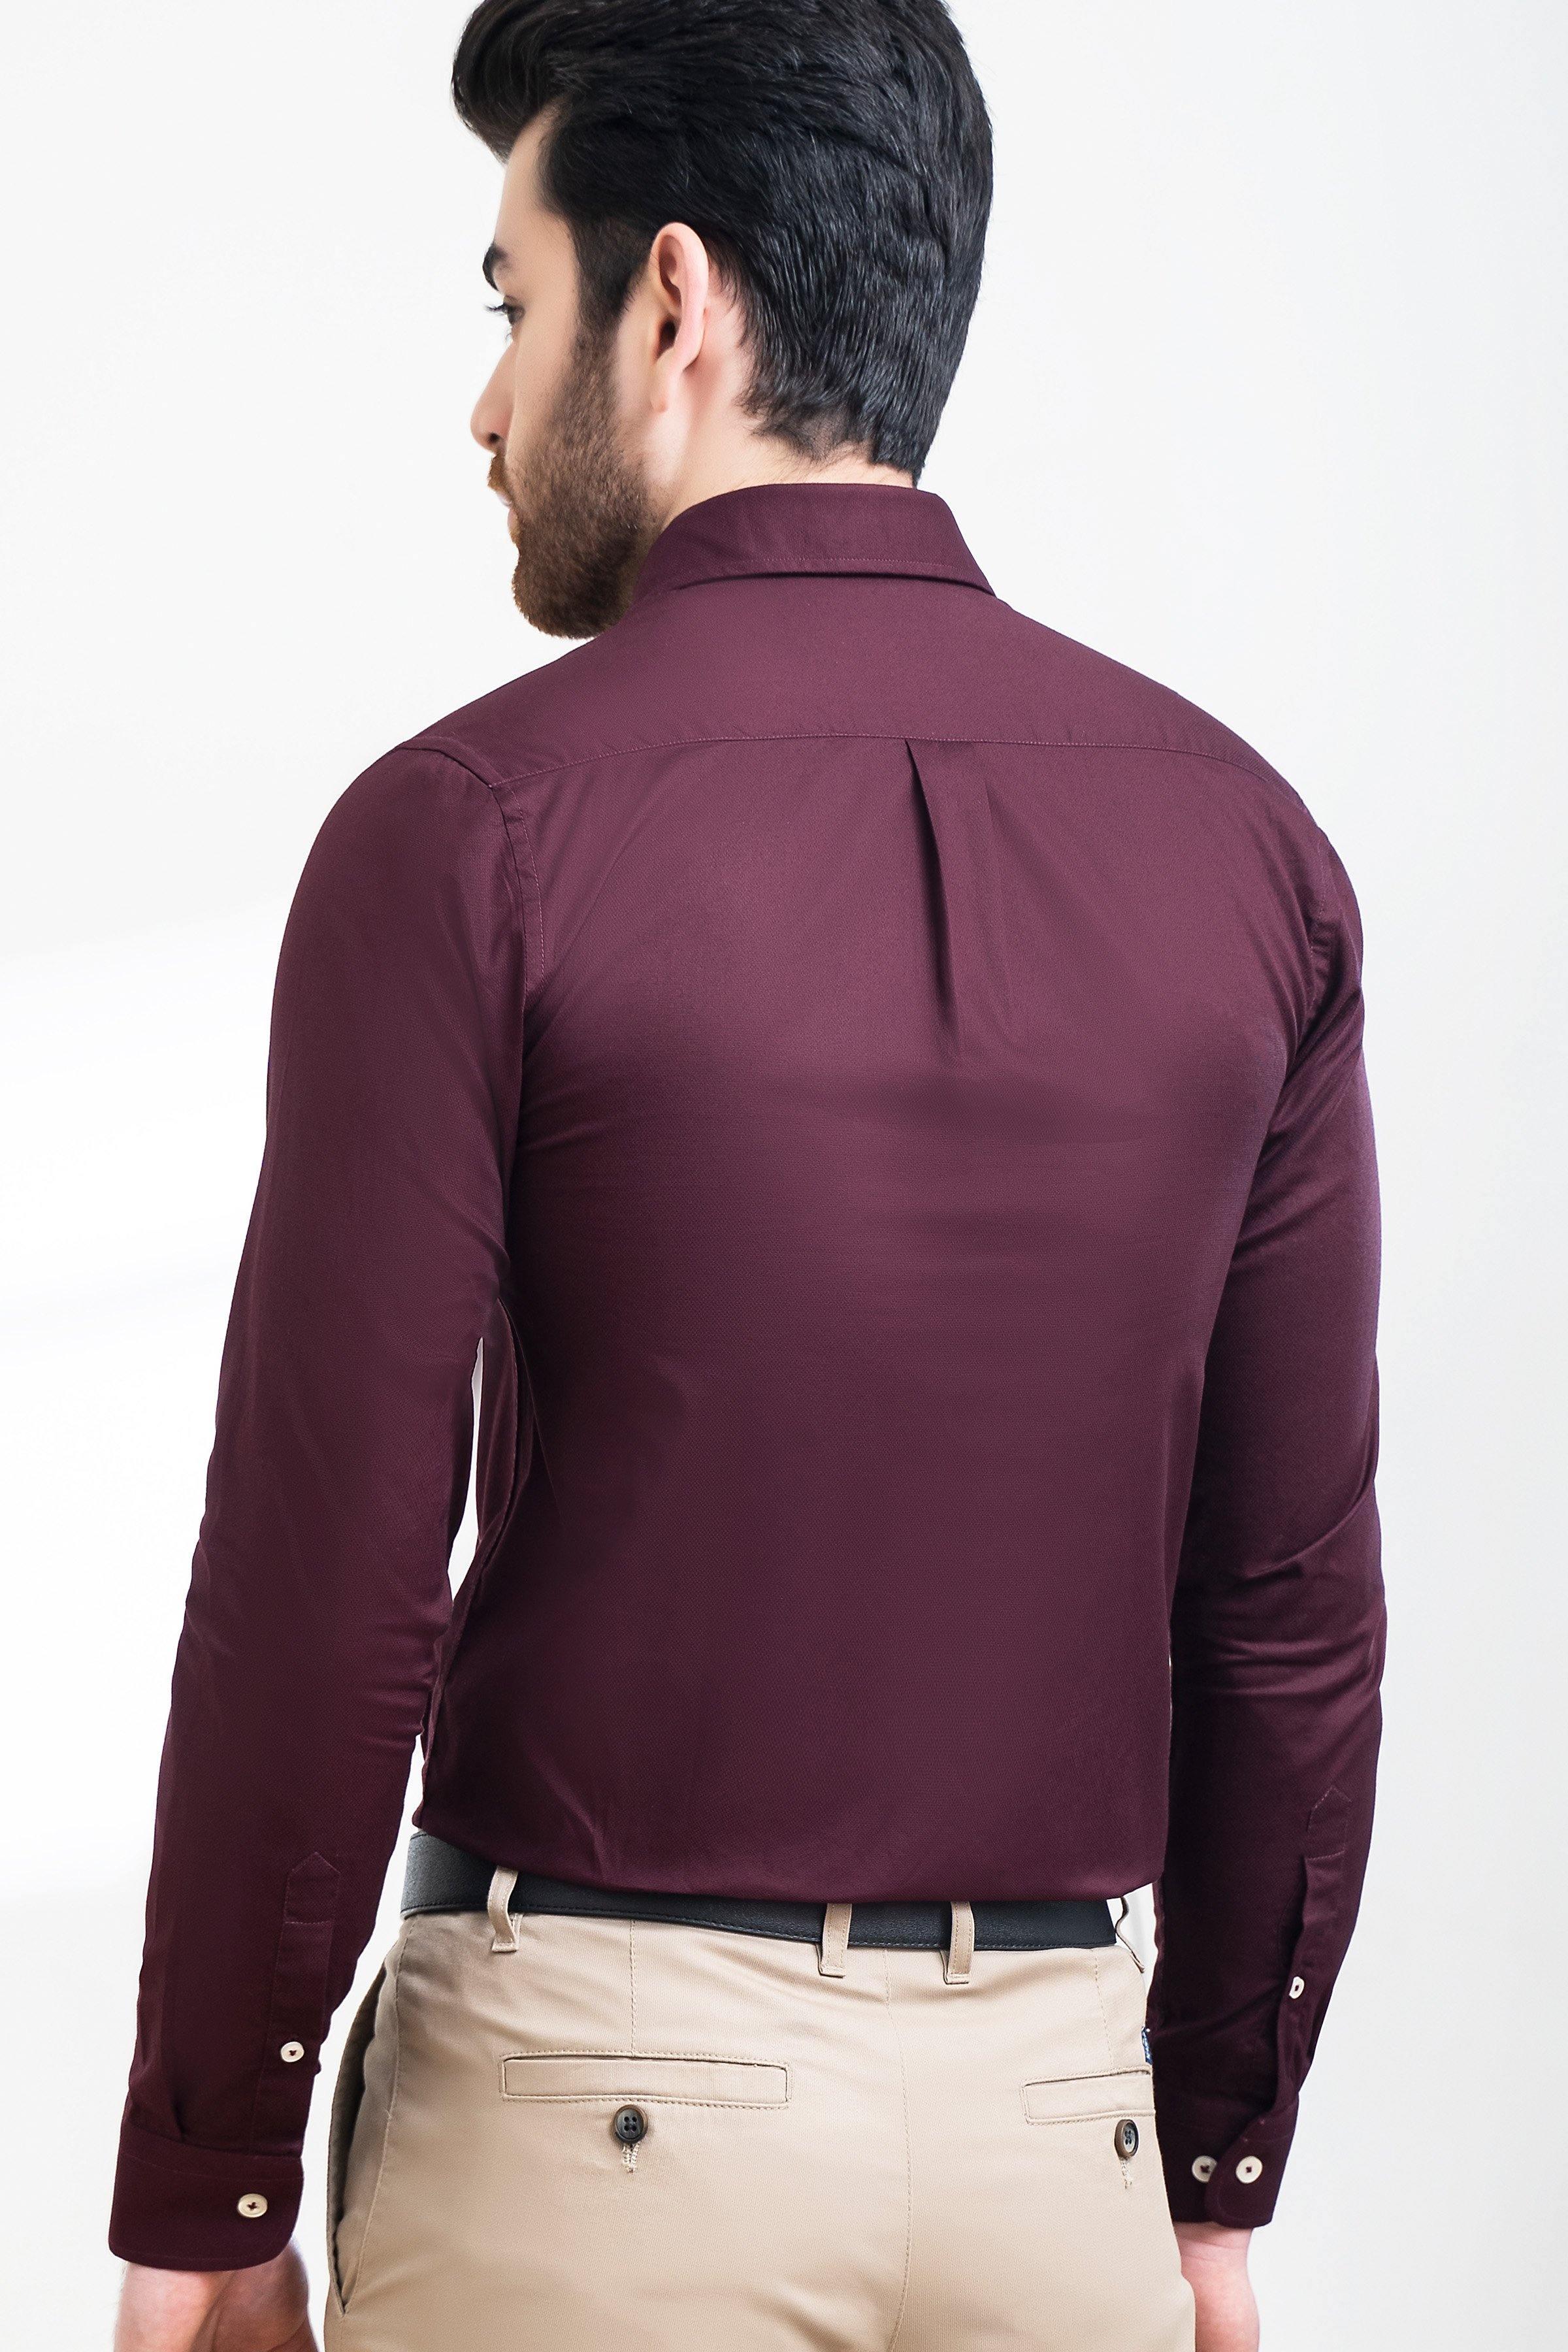 SMART SHIRT BUTTON DOWN FULL SLEEVE MAROON at Charcoal Clothing